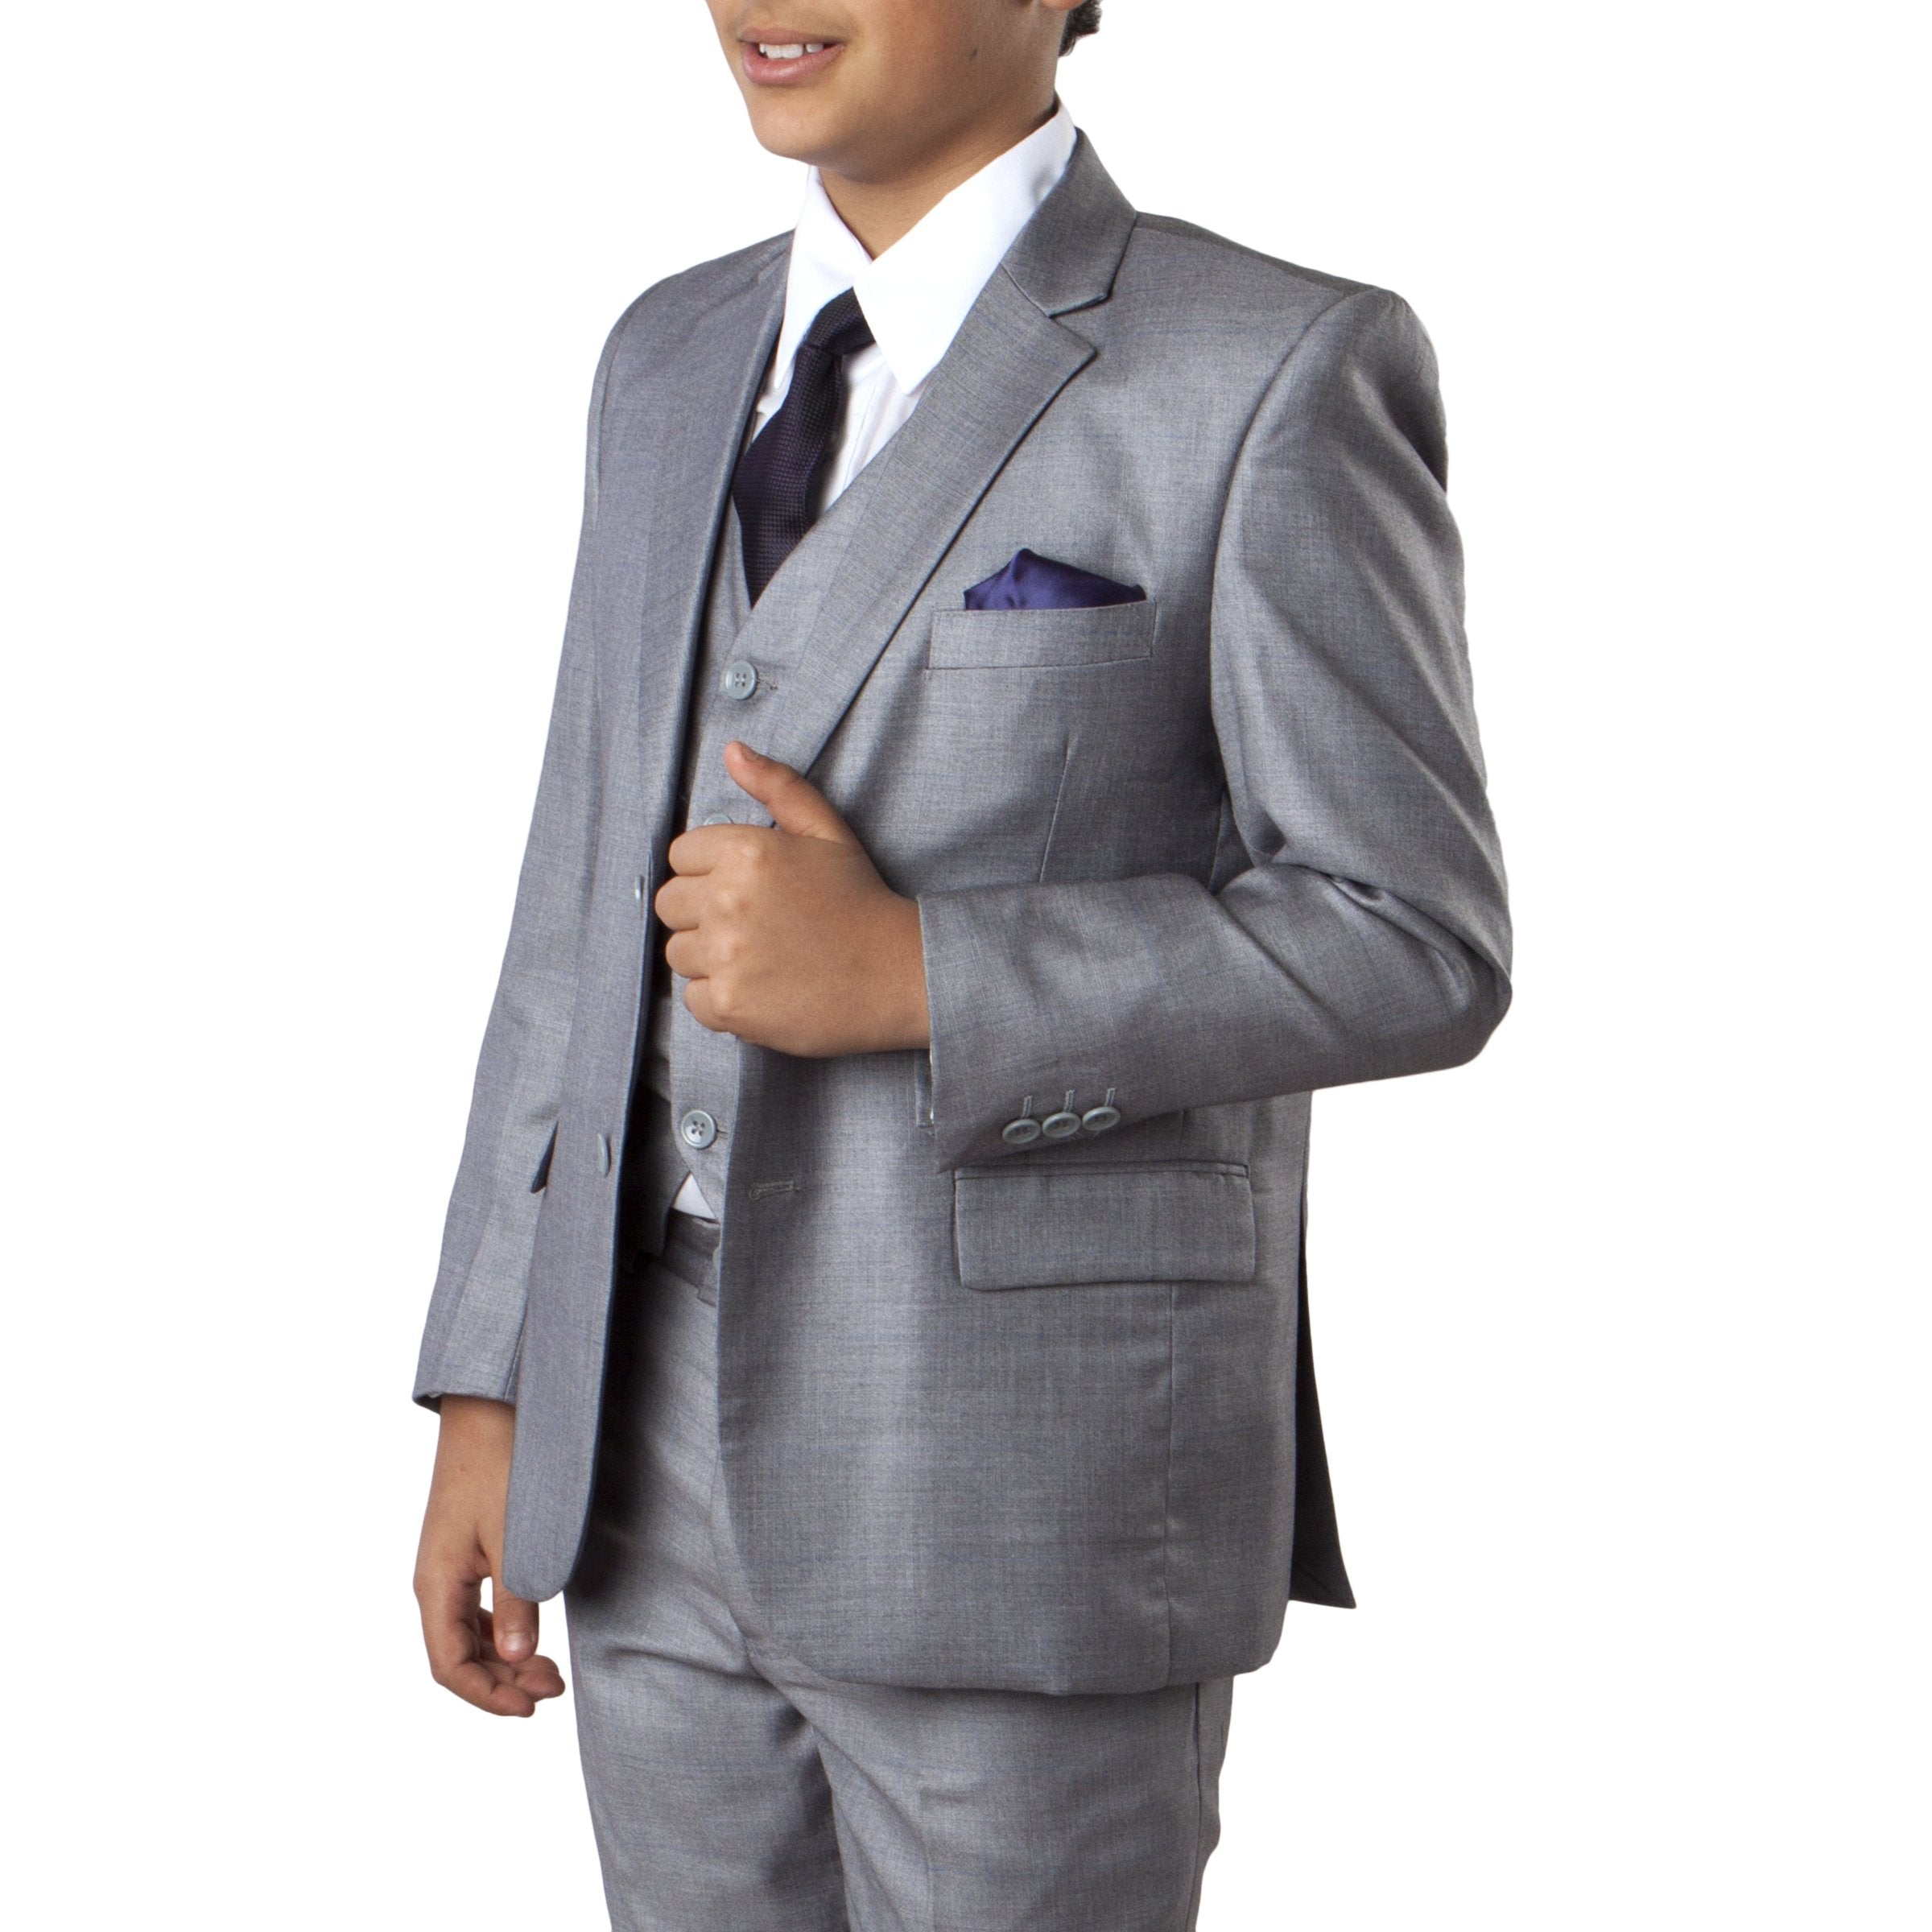 5-PIece Windowpane Suit With Matching Shirt & Tie Suits For Boy's